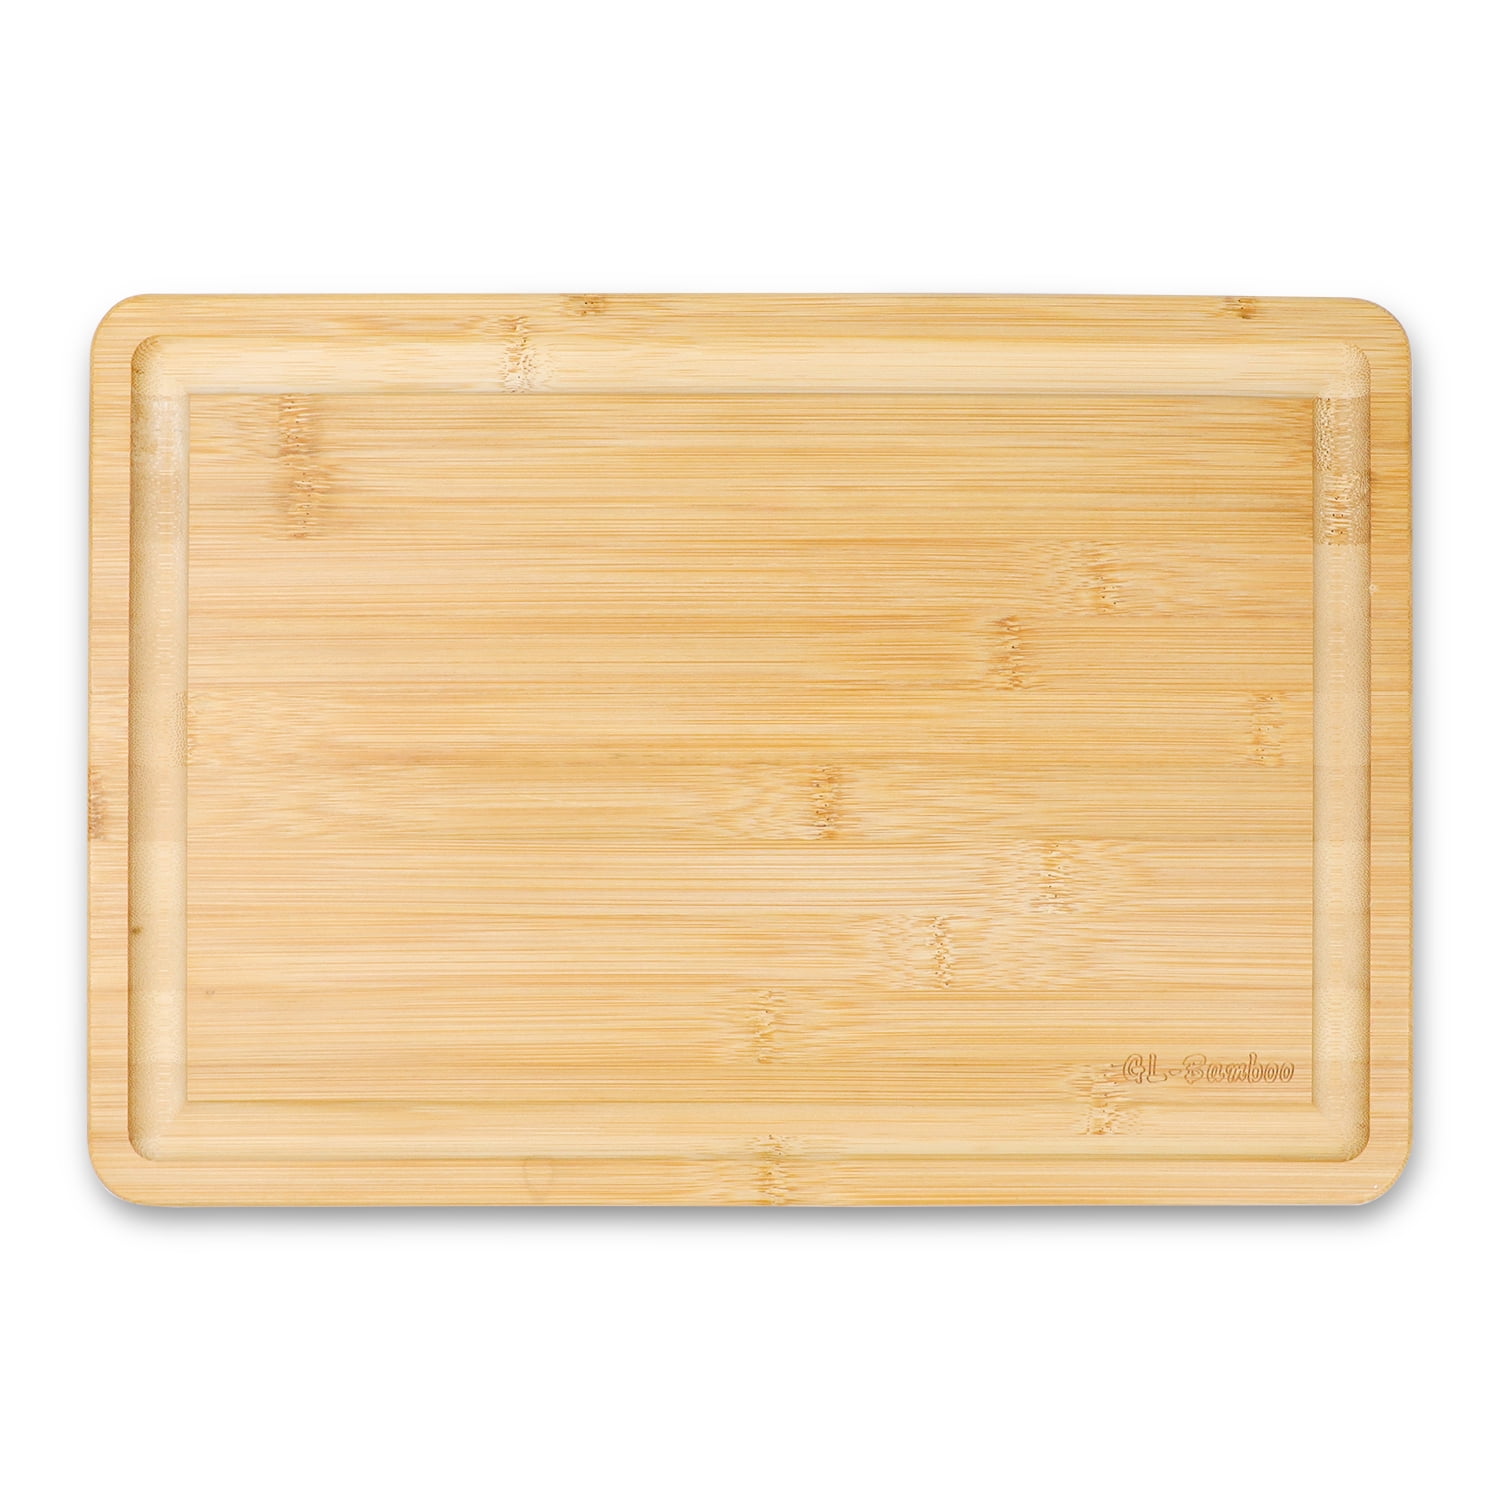  4T7 Bamboo Cutting Board for Kitchen, Chopping Board with Juice  Groove and Handles, Charcuterie Board, Reversible for Meal Prep and Serving  for Meat Veggies Cheese, Best Gift, Pre-Oiled 13 x 11